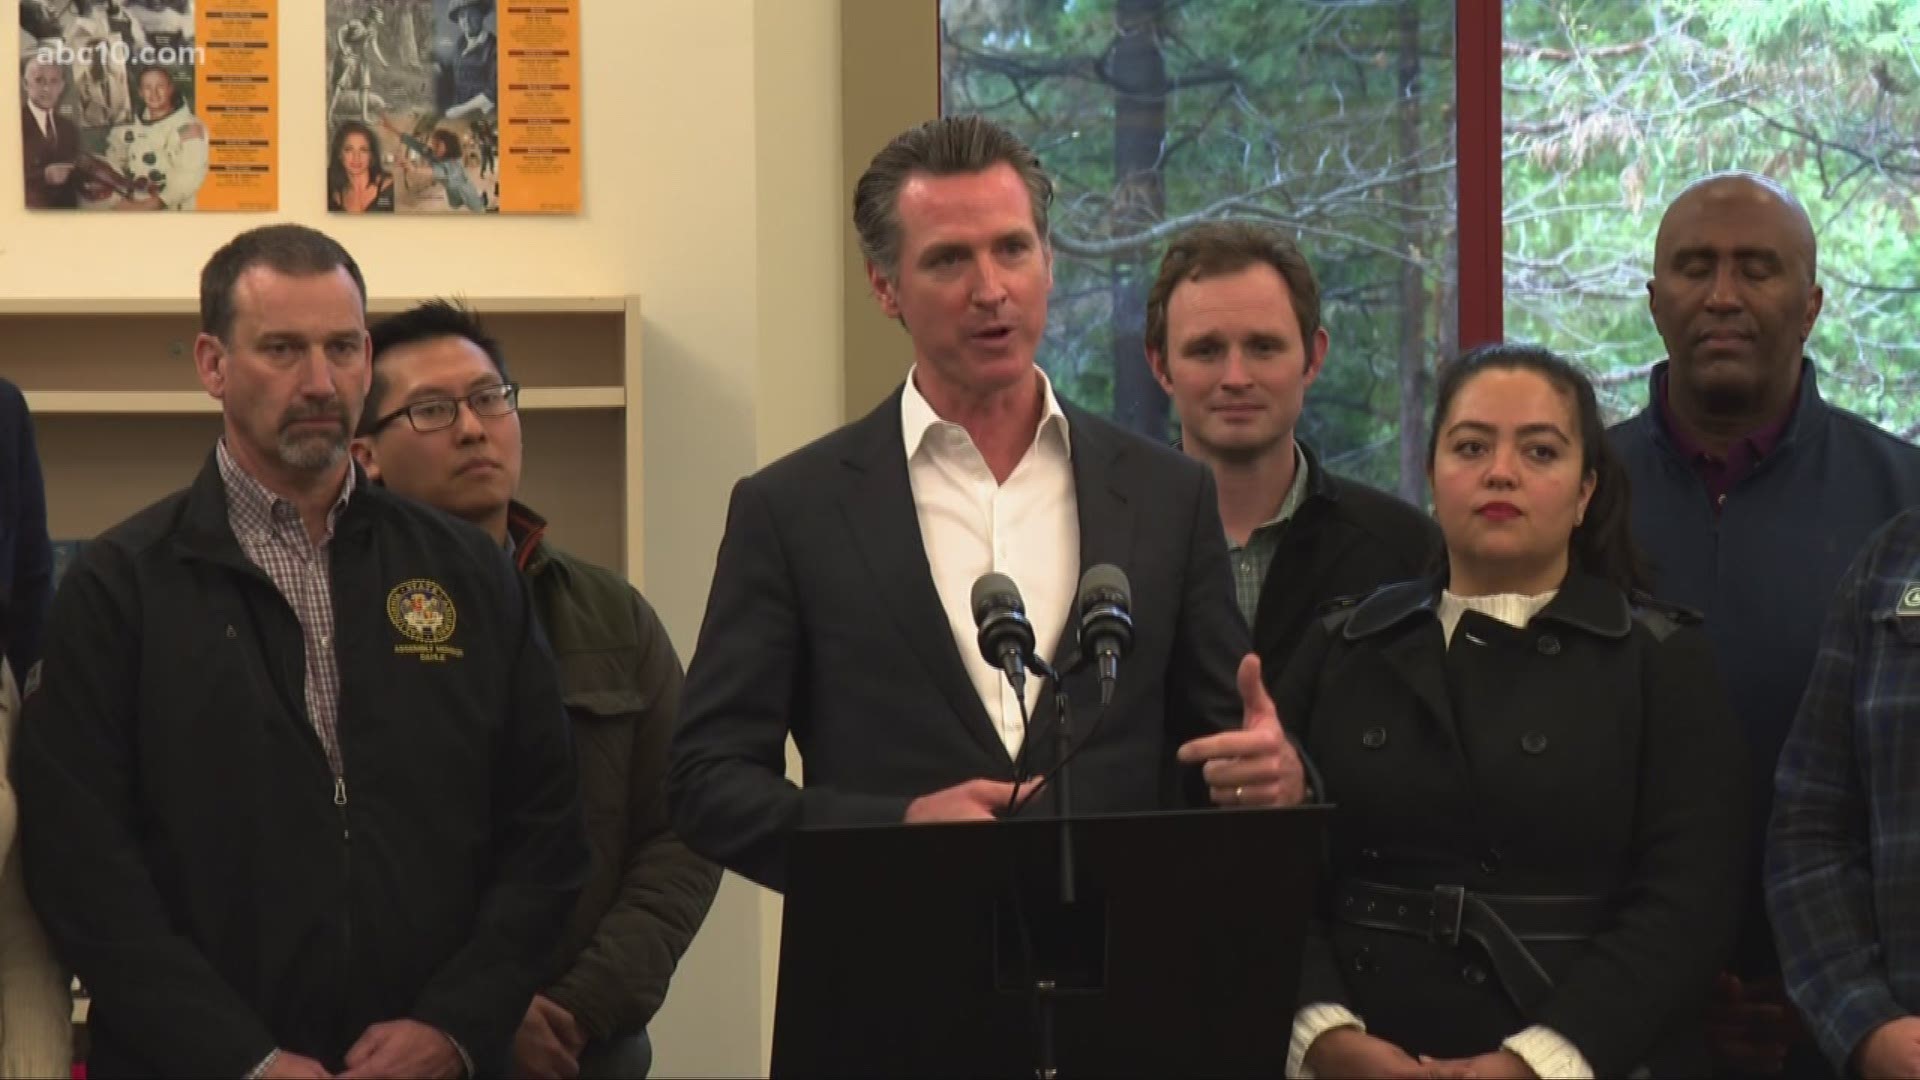 One day after signing a bill that would provide $10 million in funding for wildfire recovery, Gov. Gavin Newsom, along with elected officials from across California, visited communities in Butte County devastated by wildfires.